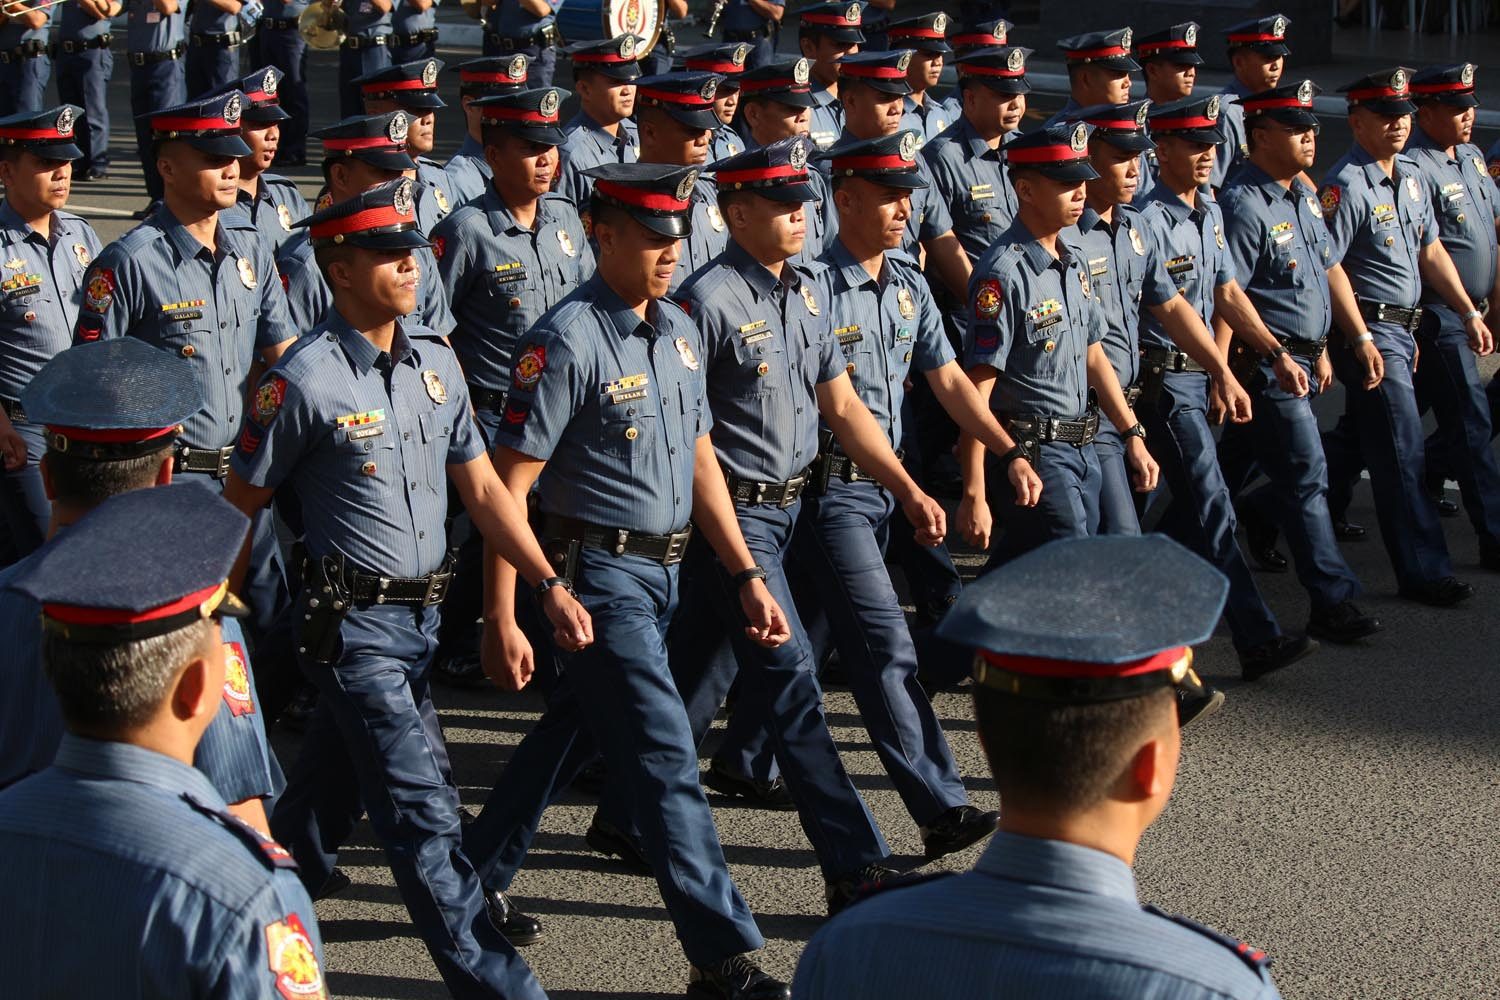 Lowering height demands for PNP now up to Duterte